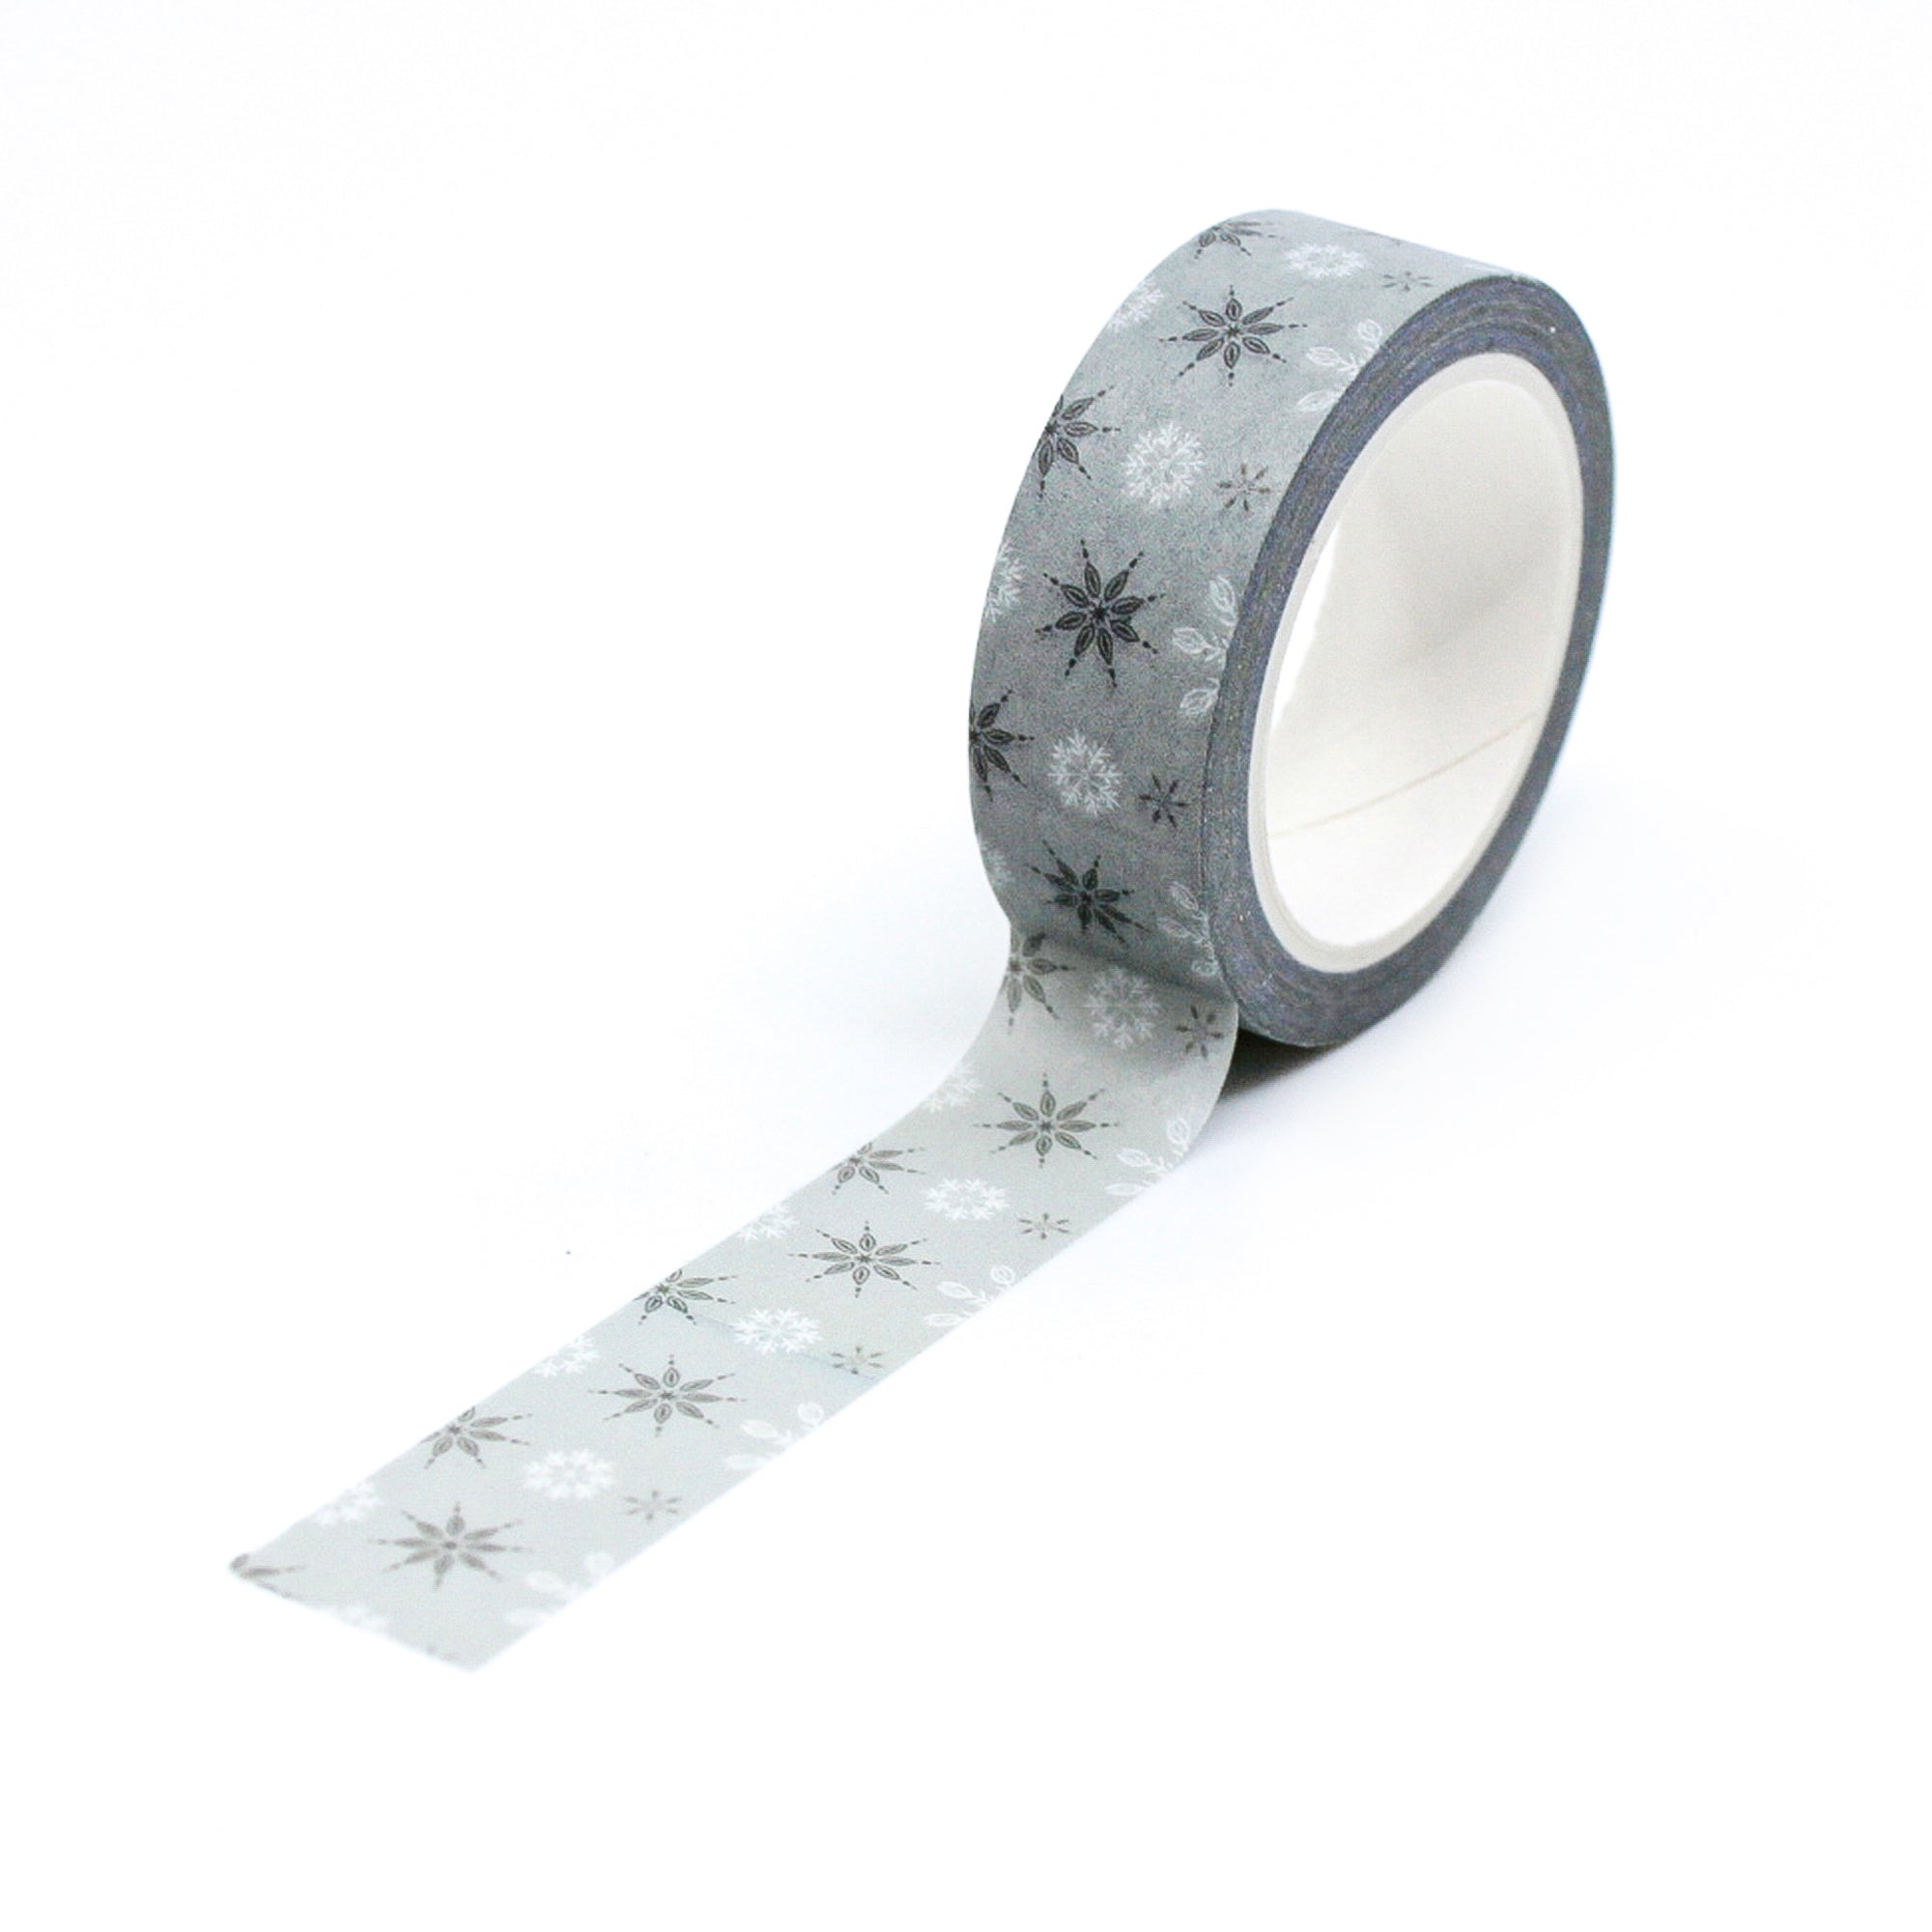 ❄️ Silver foiled Cozy Winter washi tape rolls available in the